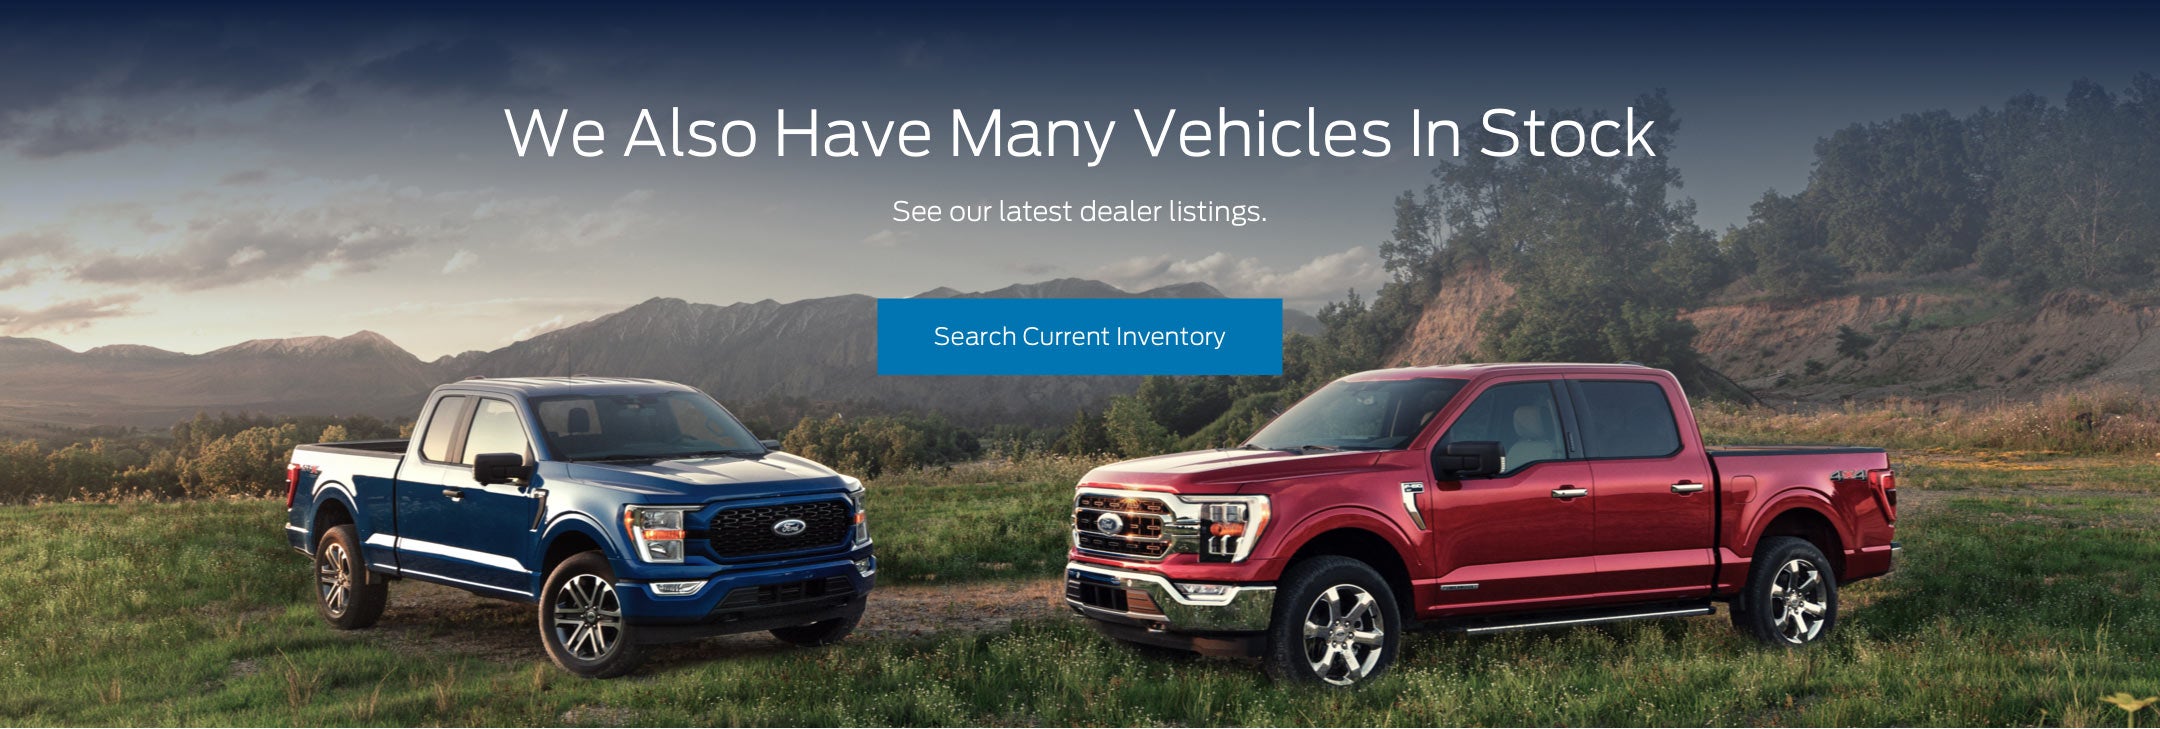 Ford vehicles in stock | Todd Judy Ford in Charleston WV